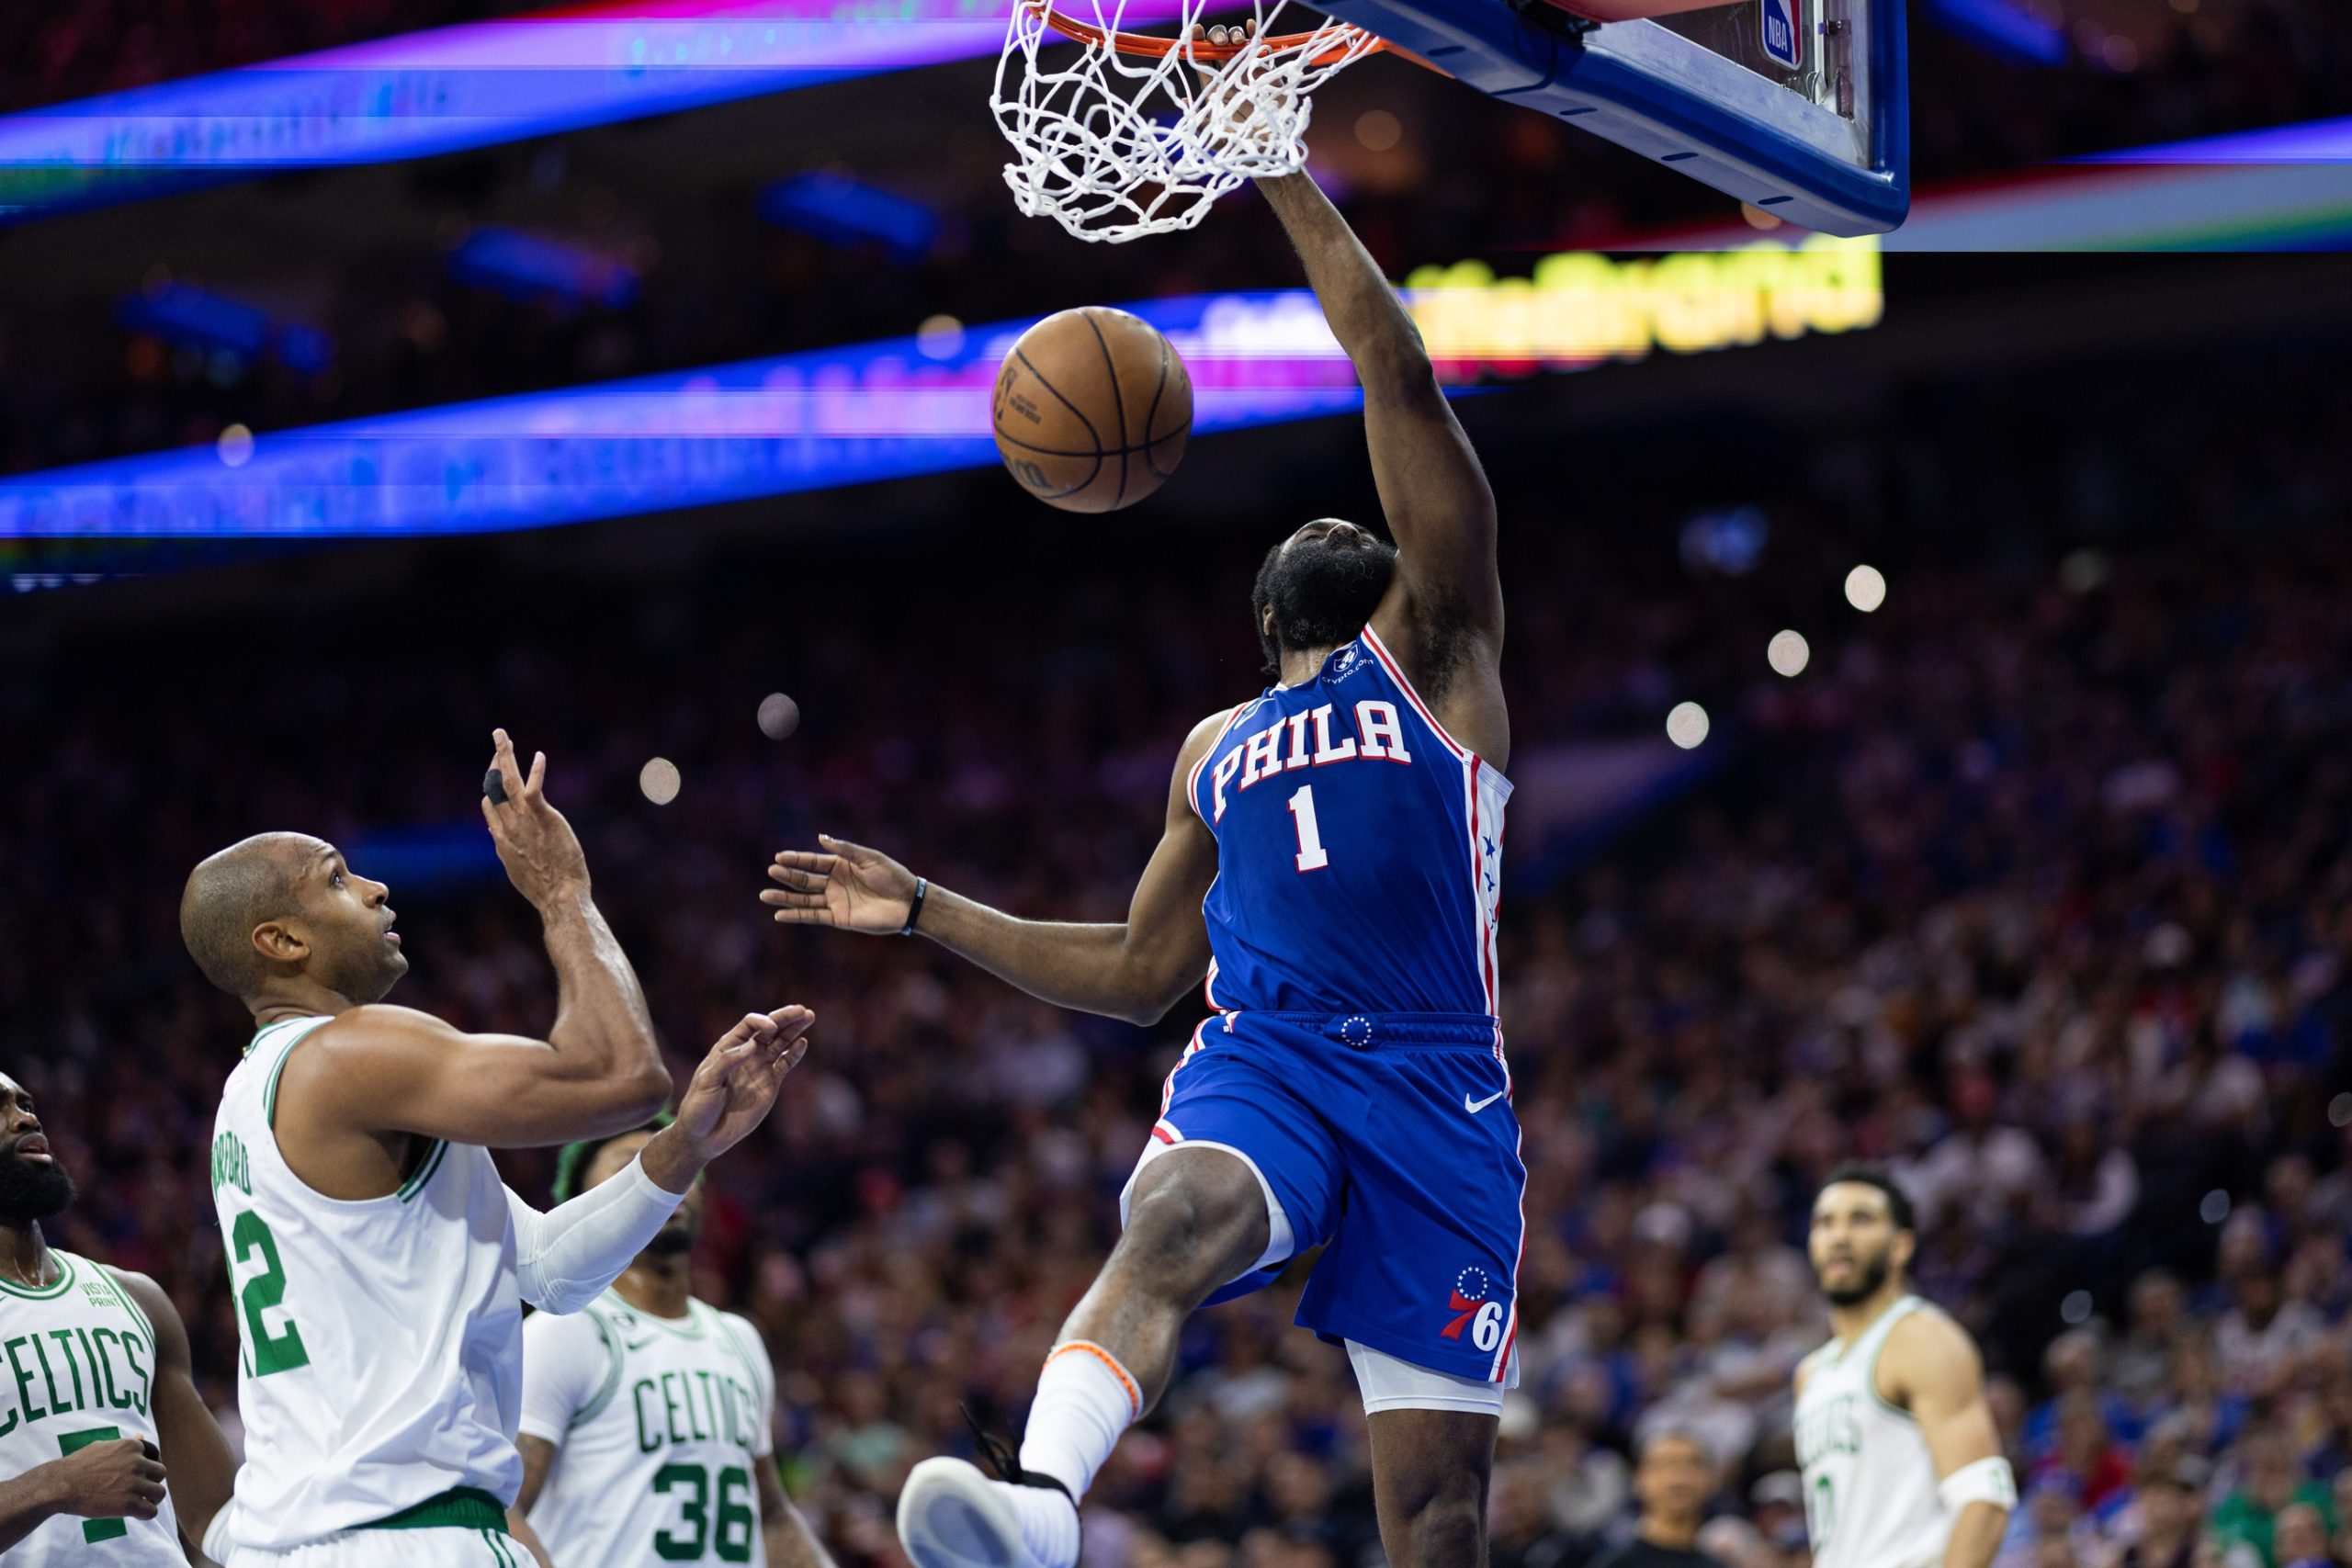 May 11, 2023; Philadelphia, Pennsylvania, USA; Philadelphia 76ers guard James Harden (1) dunks the ball against Boston Celtics center Al Horford (42) during the second quarter in game six of the 2023 NBA playoffs at Wells Fargo Center. Mandatory Credit: Bill Streicher-USA TODAY Sports